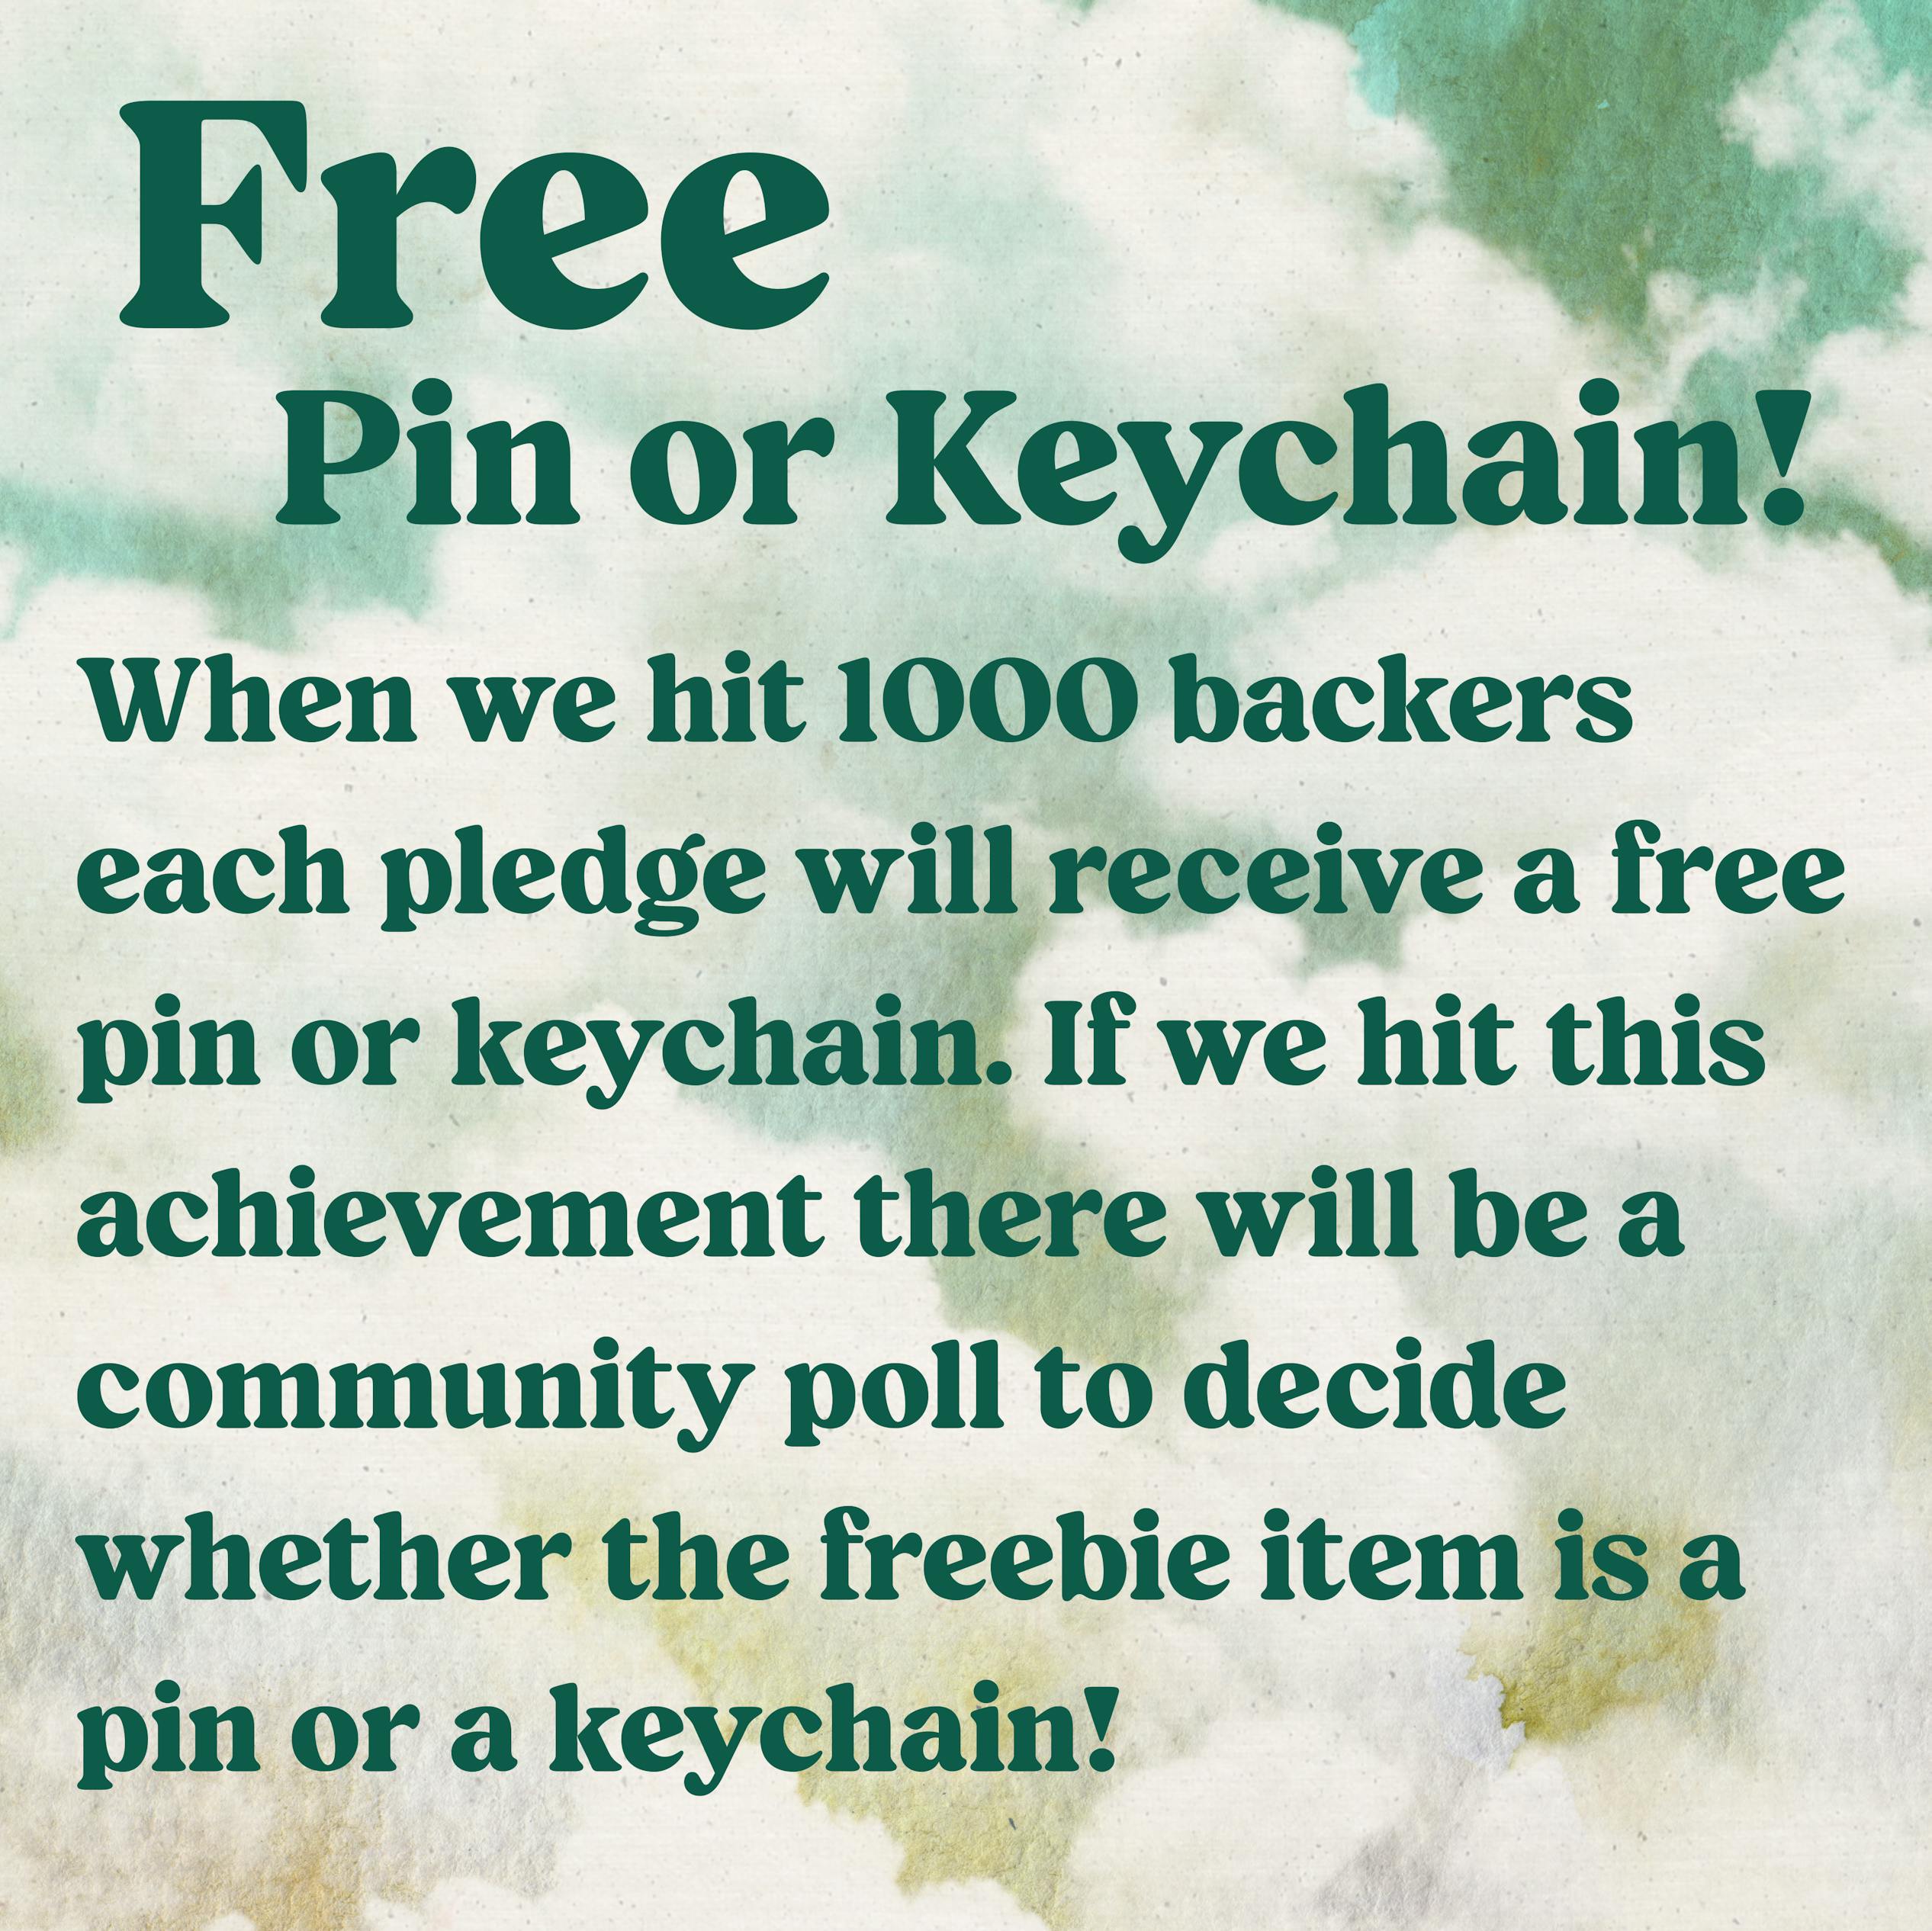 Free Pin or Keychain